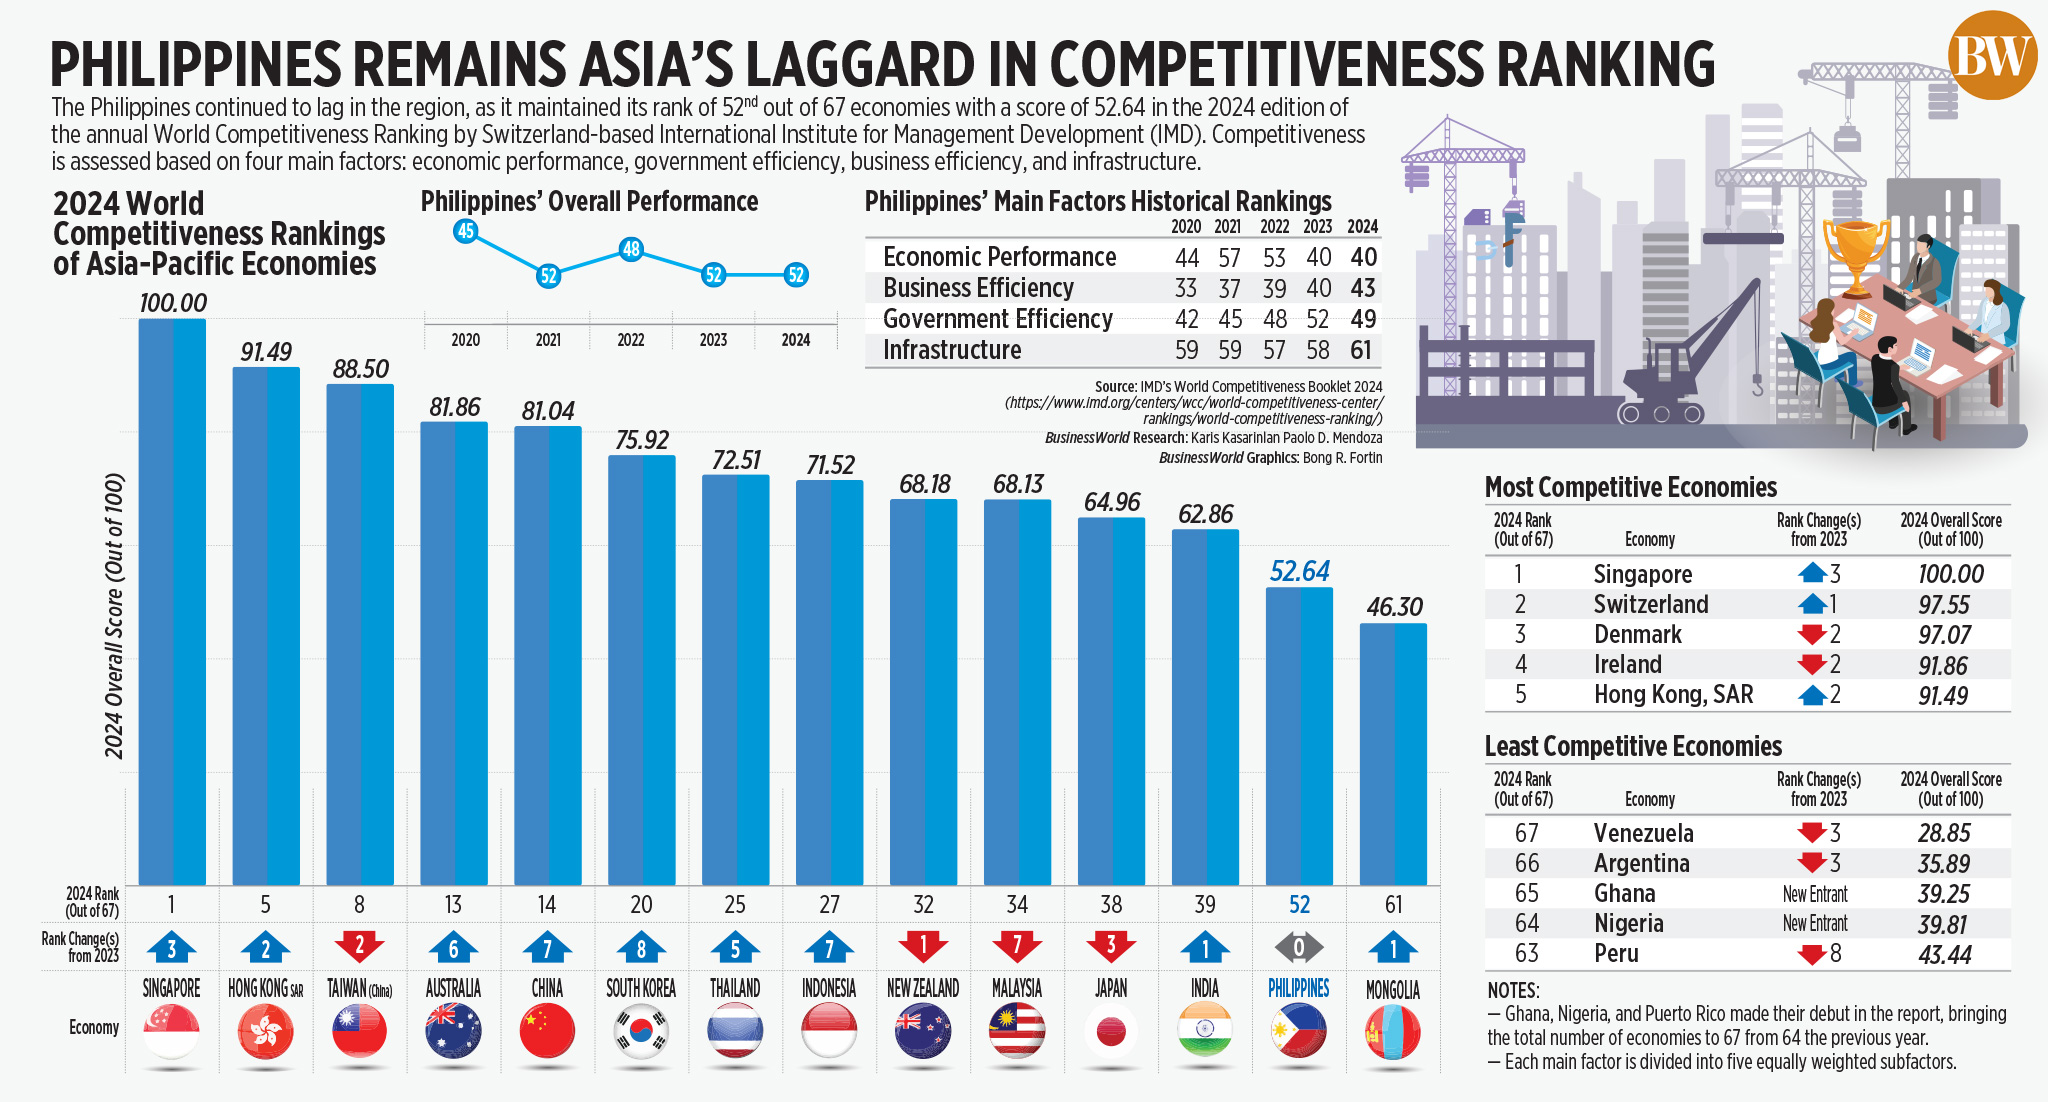 The Philippines remains Asia's laggard in competitiveness rankings